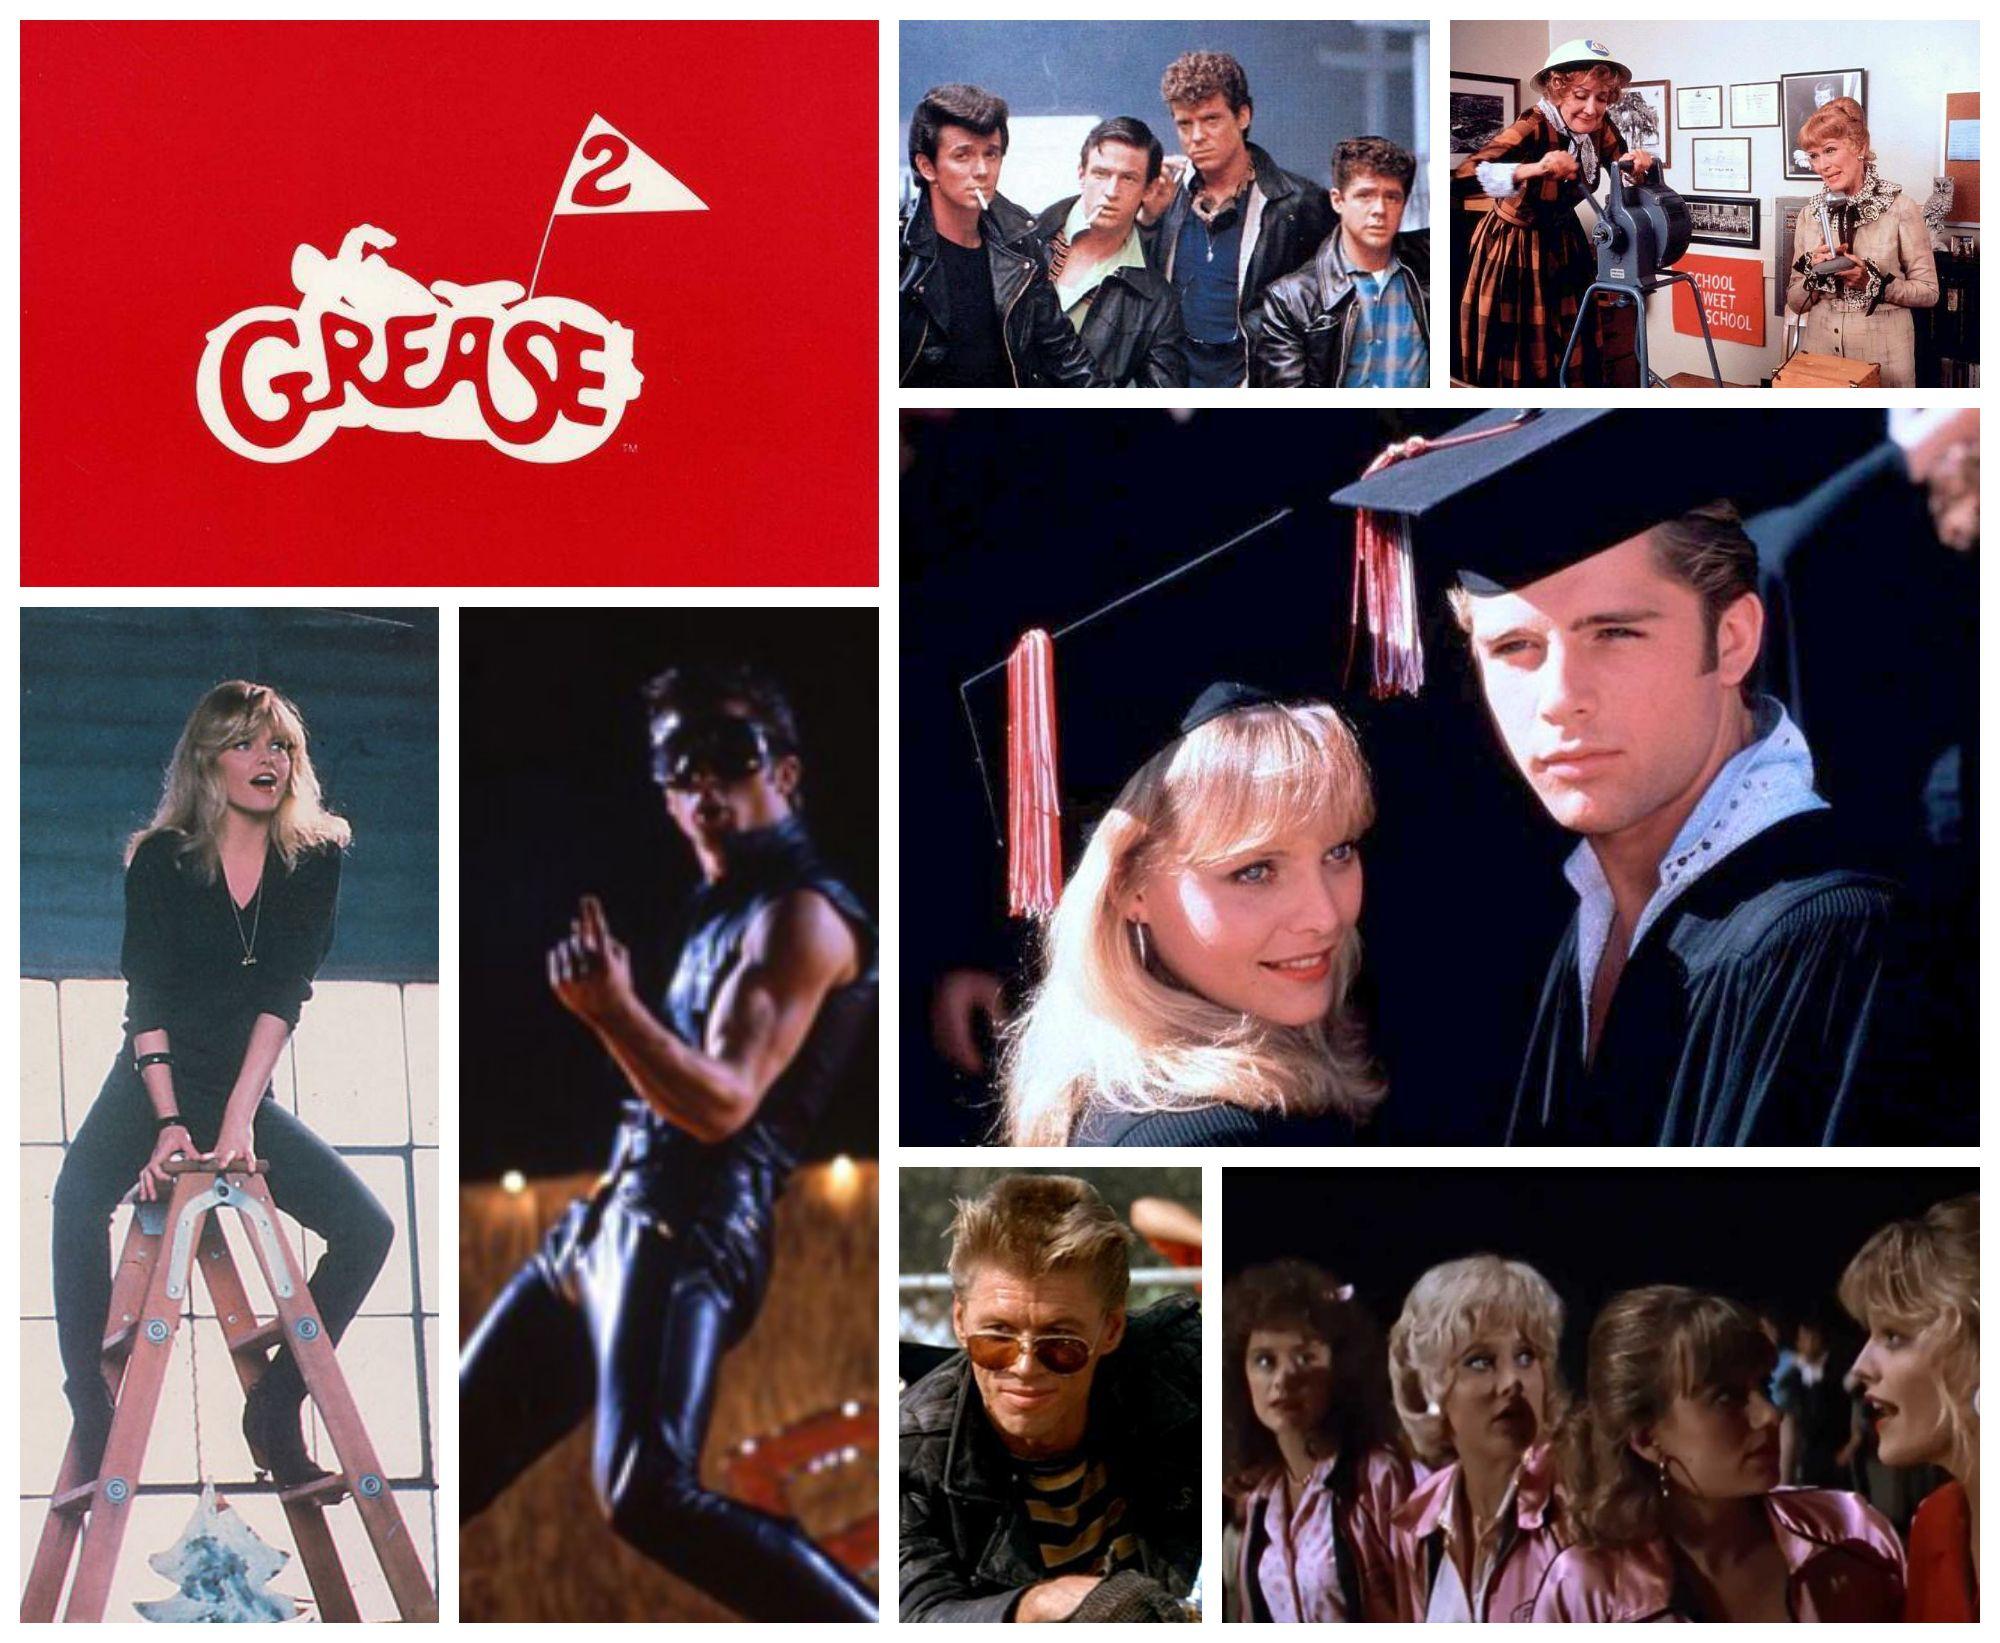 Happy 'Grease 2' Day 2014!